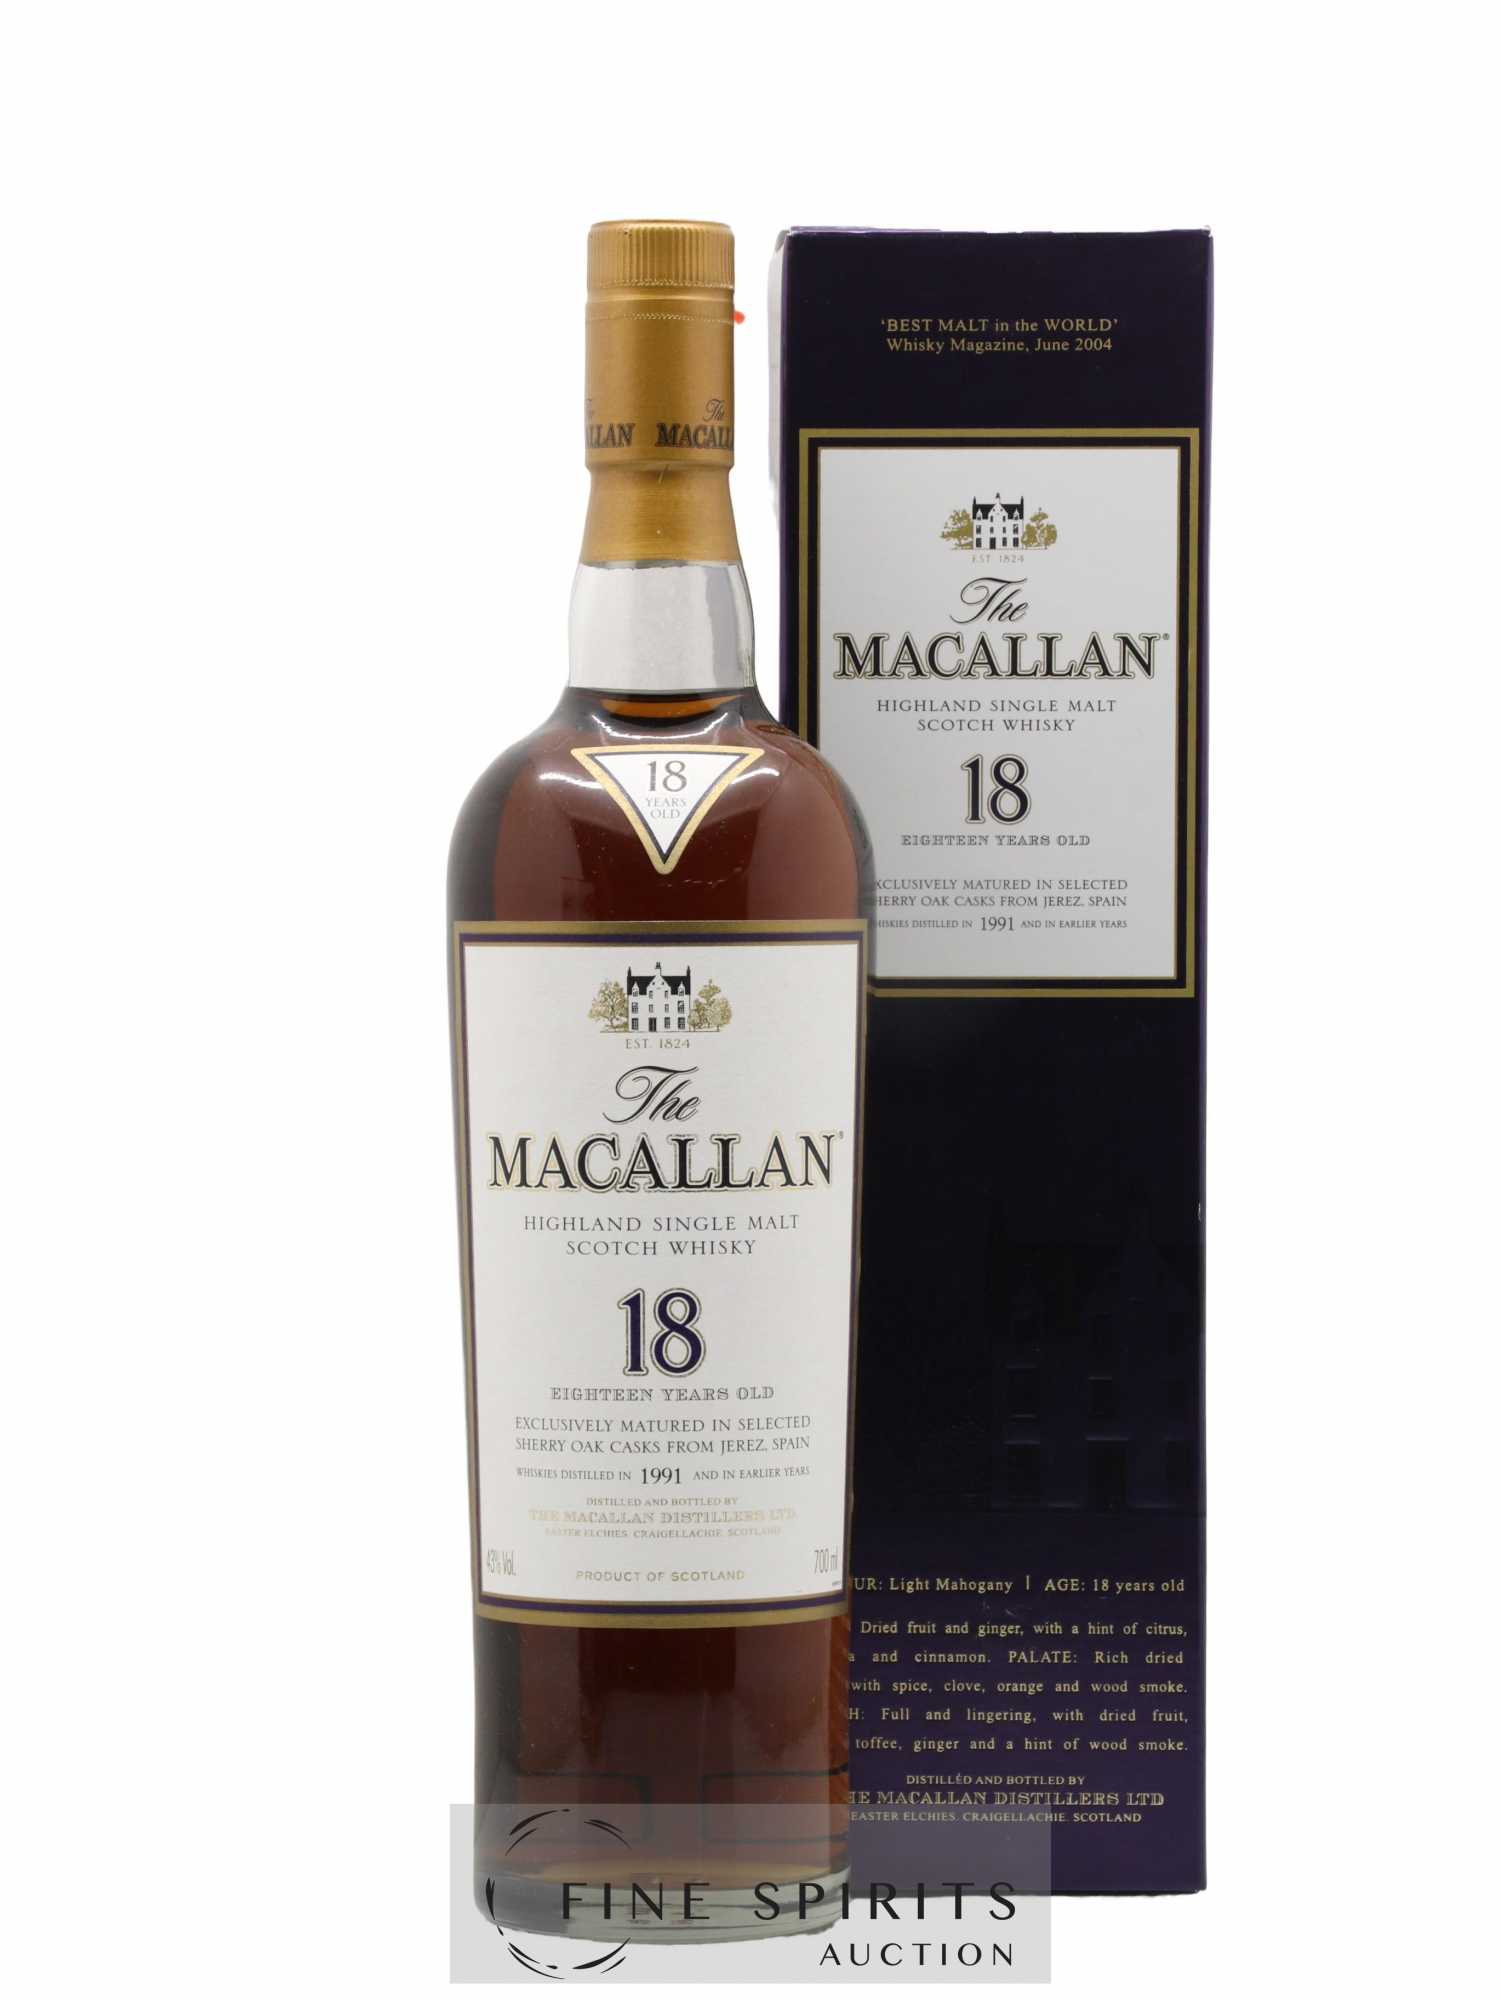 Macallan (The) 18 years 1991 Of. Selected Sherry Oak Casks from Jerez